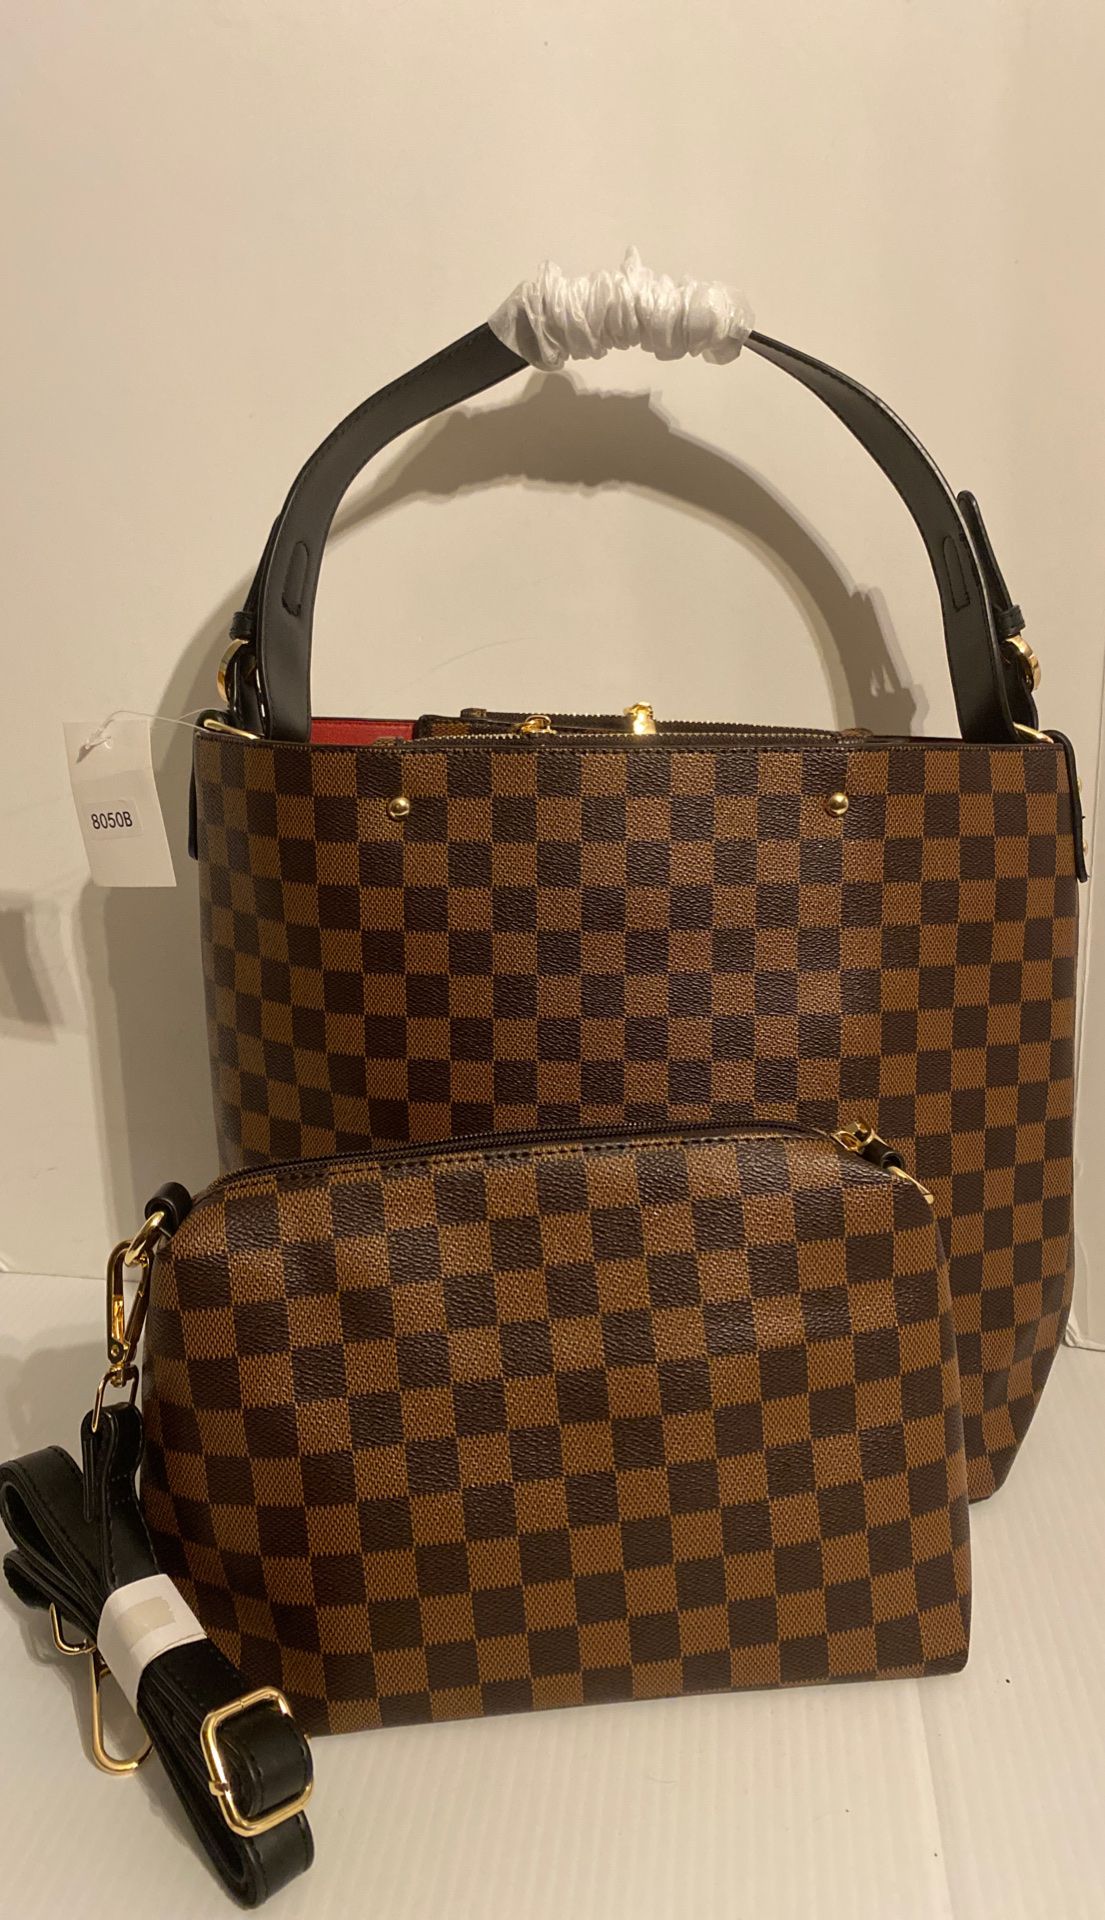 UNBRANDED ALL IN ONE CHECKERED HANDBAG BAG BROWN/ DARK BROWN XL